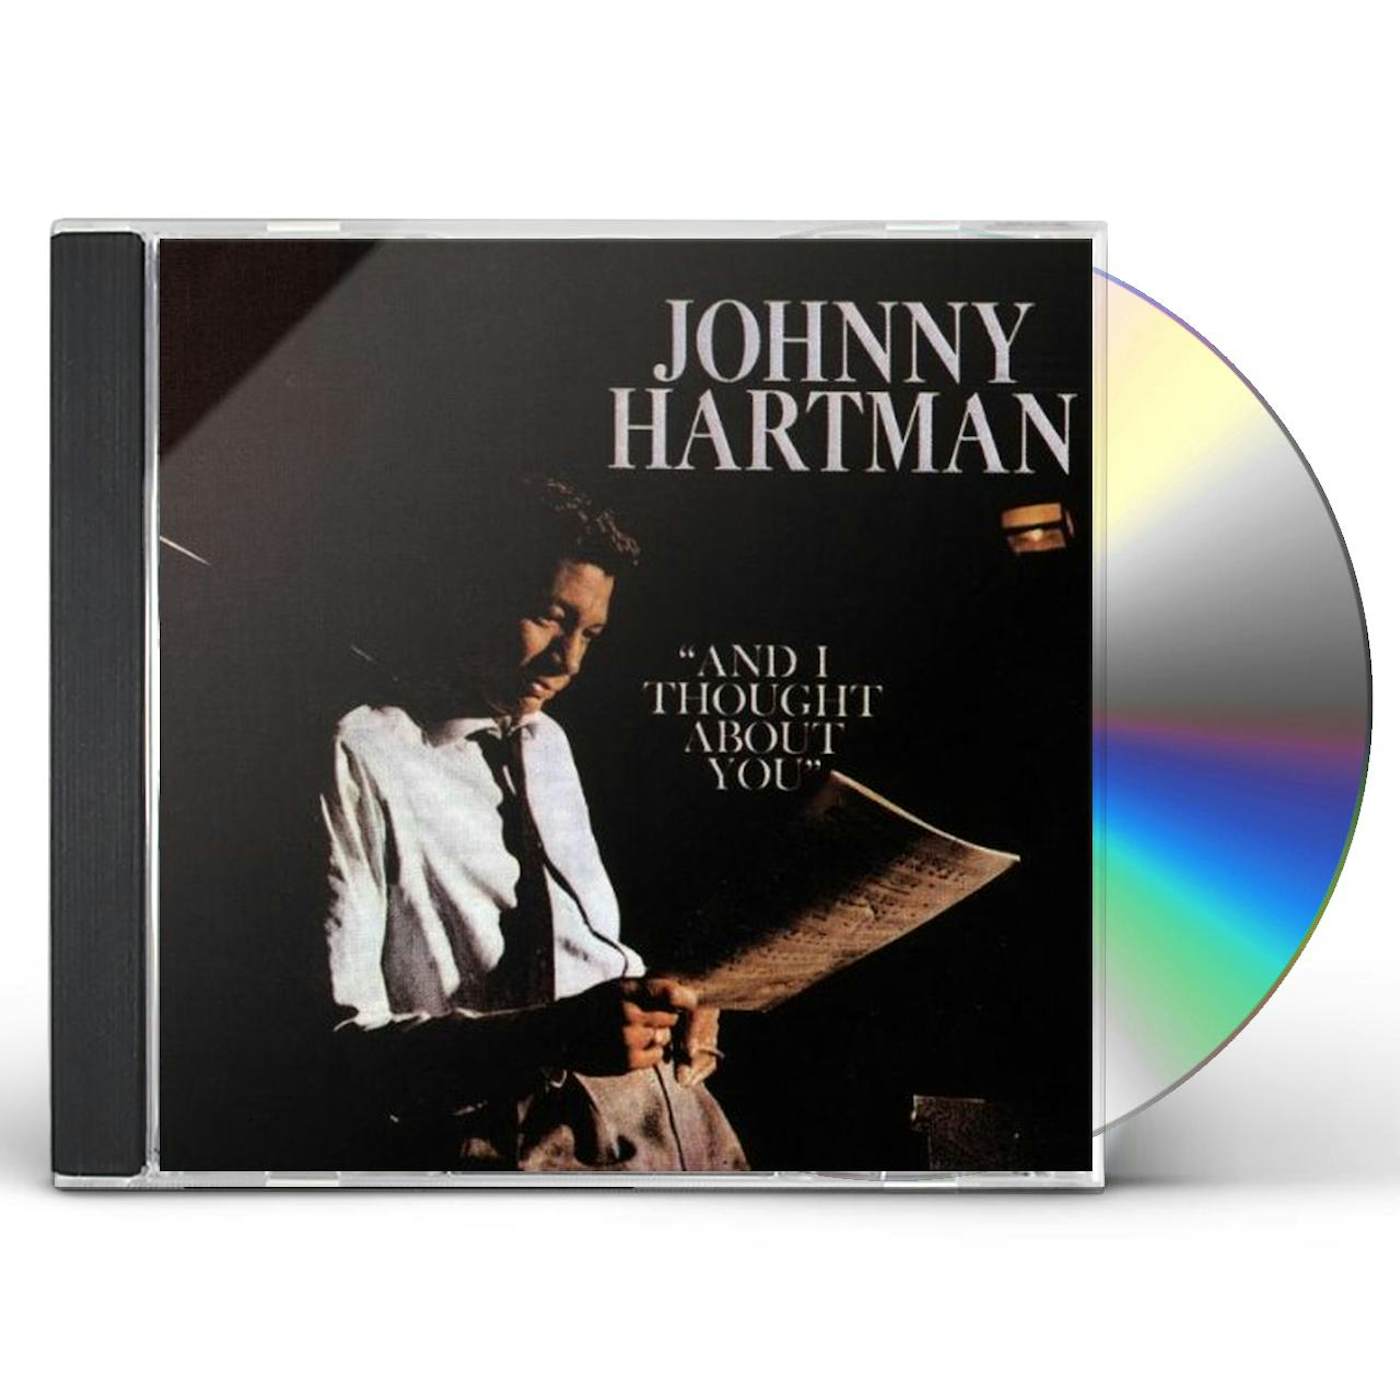 Johnny Hartman I THOUGHT ABOUT YOU CD